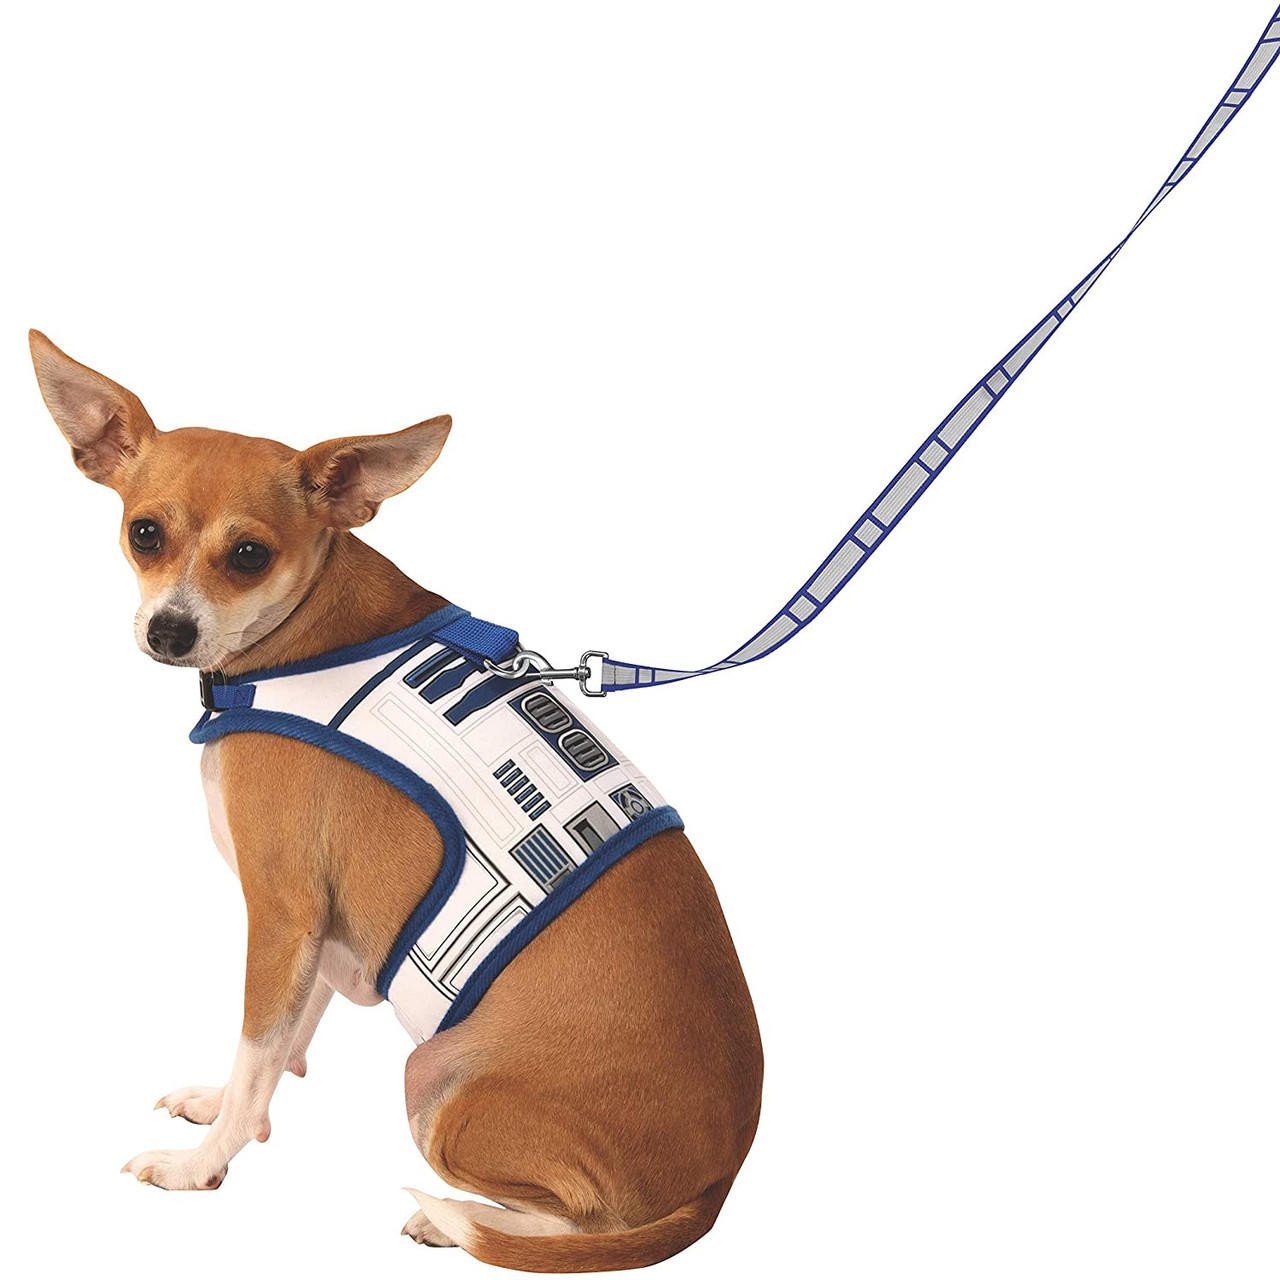 May The Force Be With You -- Chihuahuas to Wear Star Wars Jersey